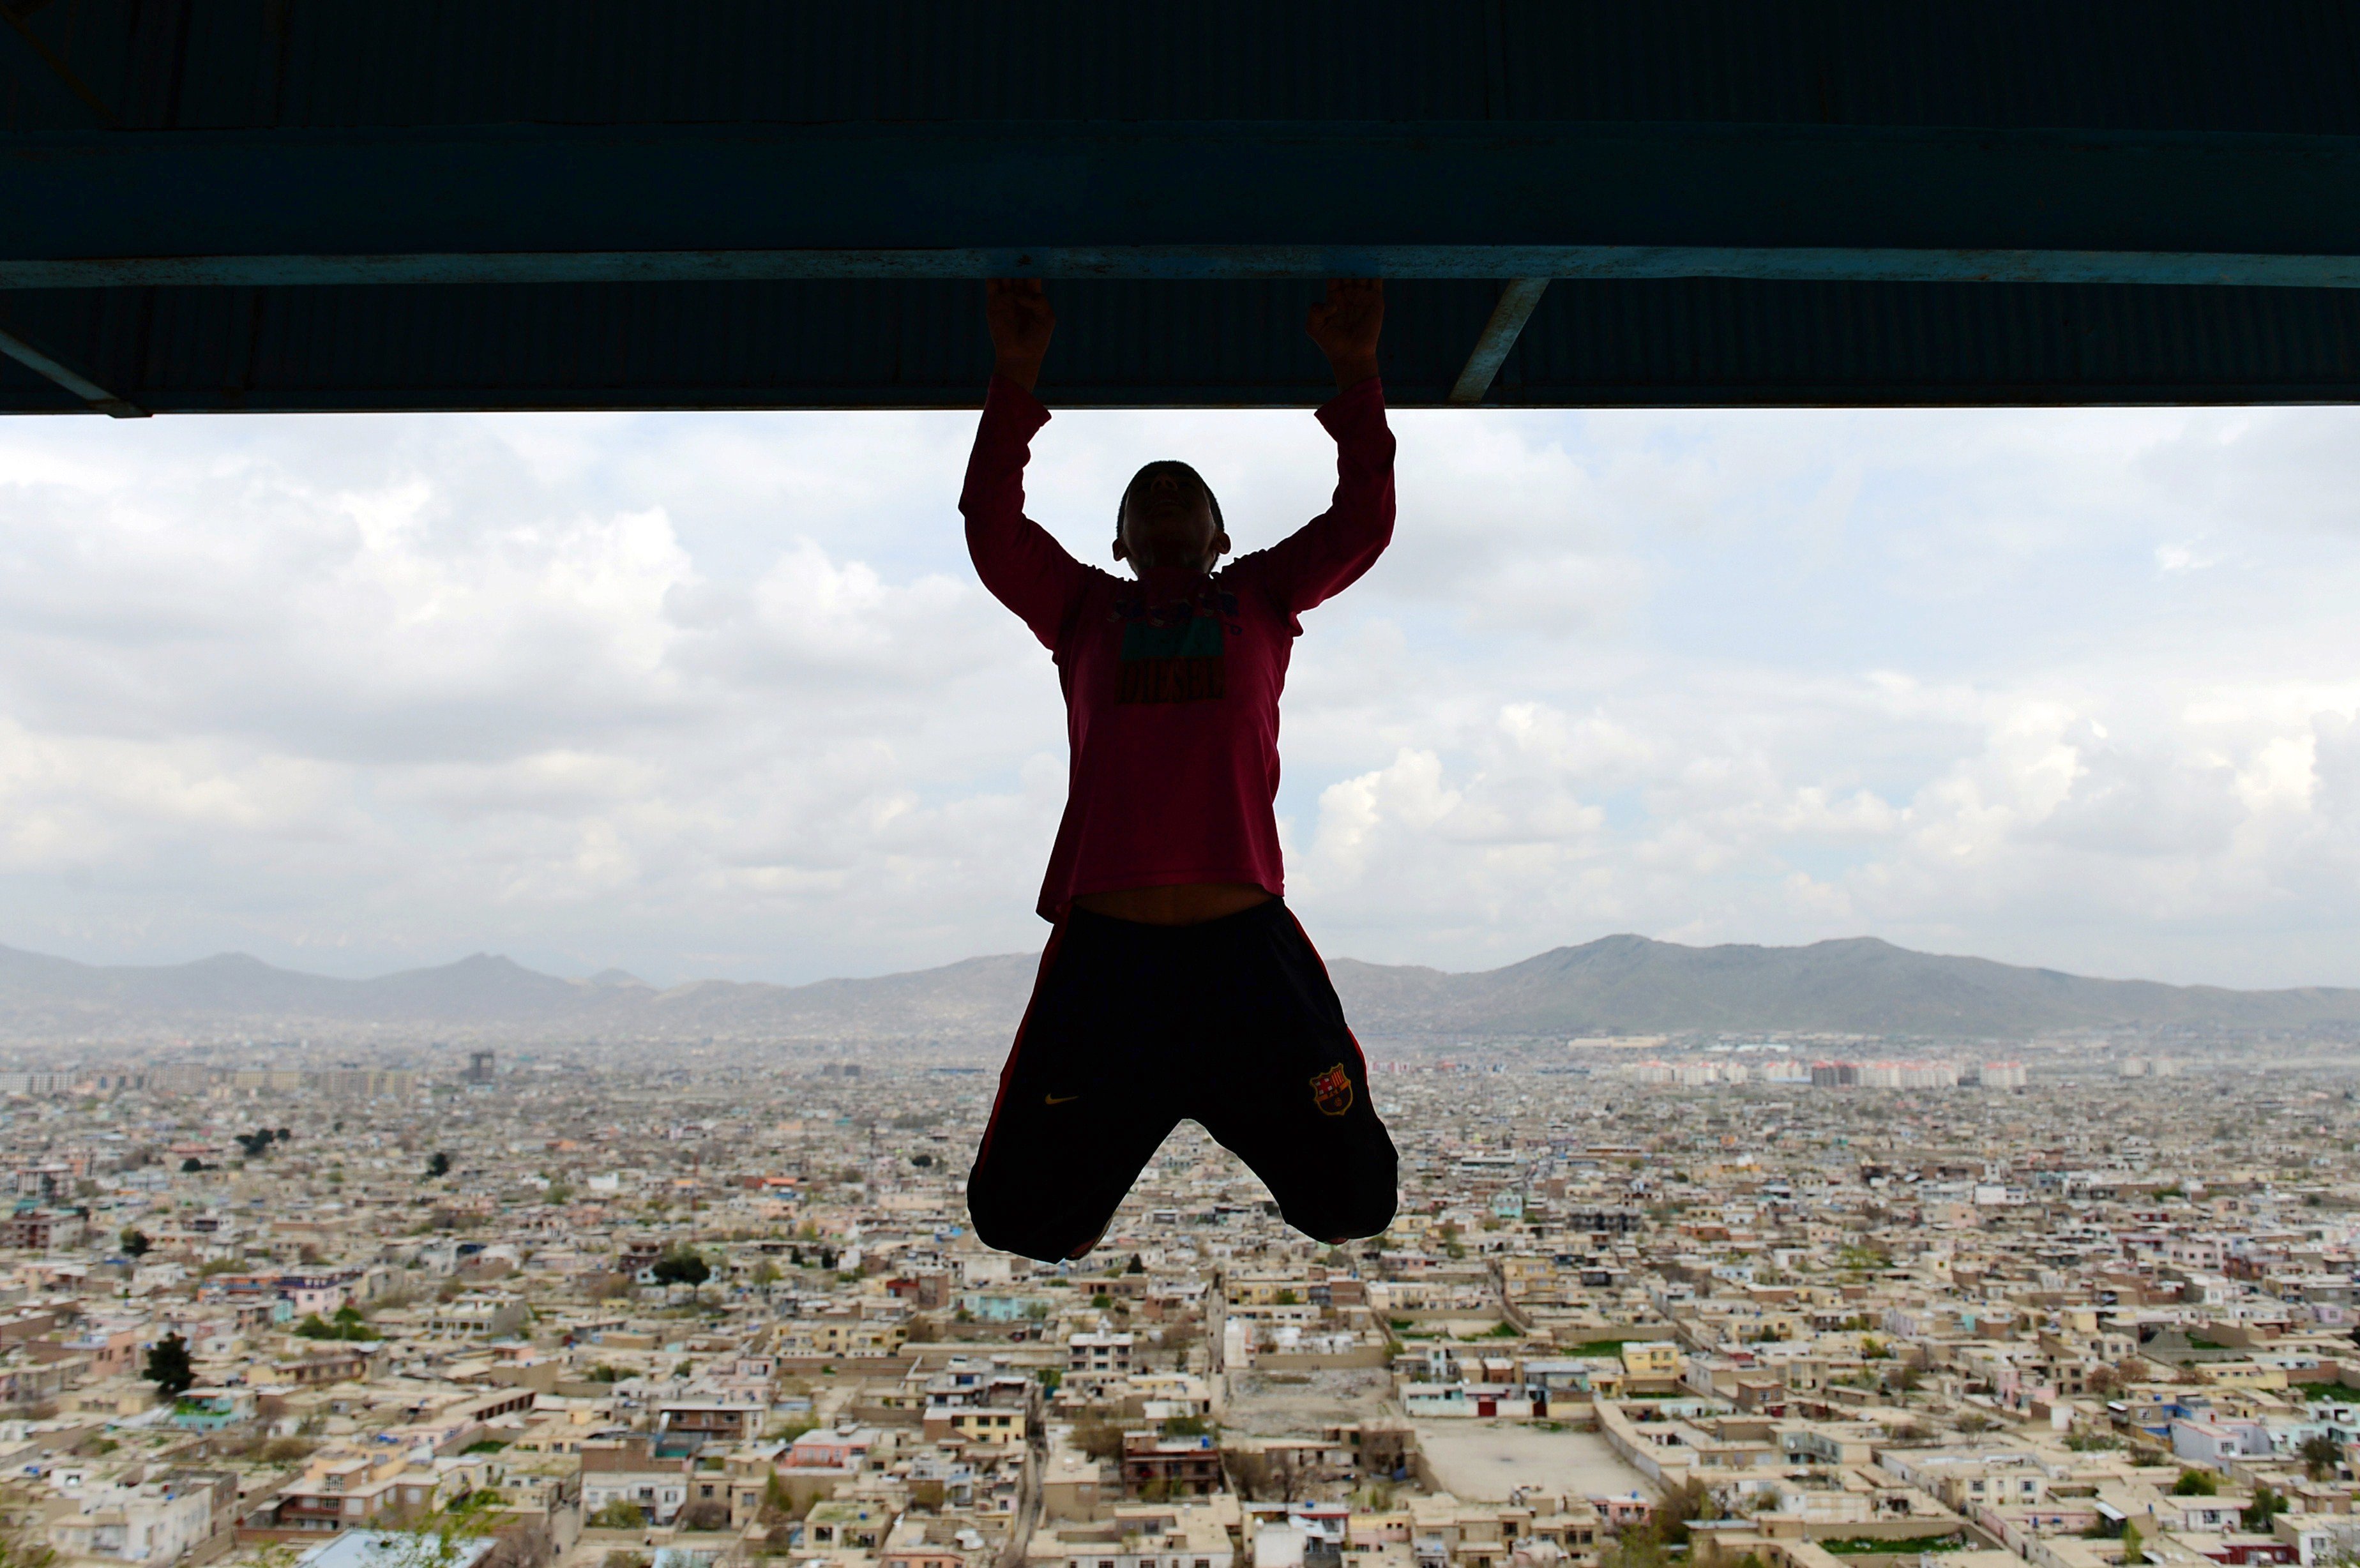 April 18, 2014. An Afghan youth exercises at Wazir Akbar Khan hilltop overlooking Kabul. Football is a popular sport in the war-torn country, with the Afghan national football team winning last year's South Asian Football Championship.